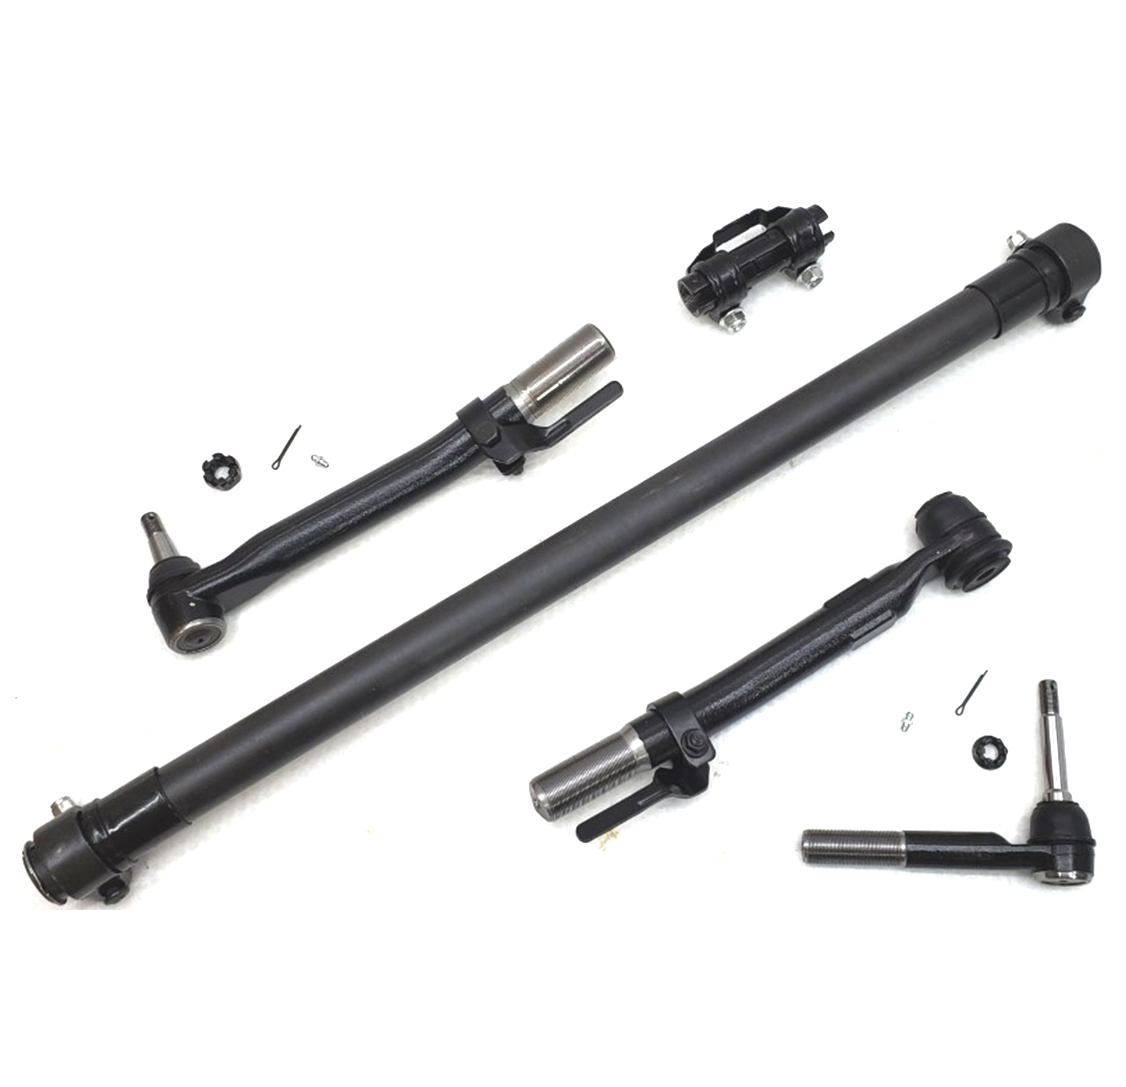 XRF Tie Rod Kit for 2017-2019 Ford F250 & F350 Super Duty 4x4 Wide Frame